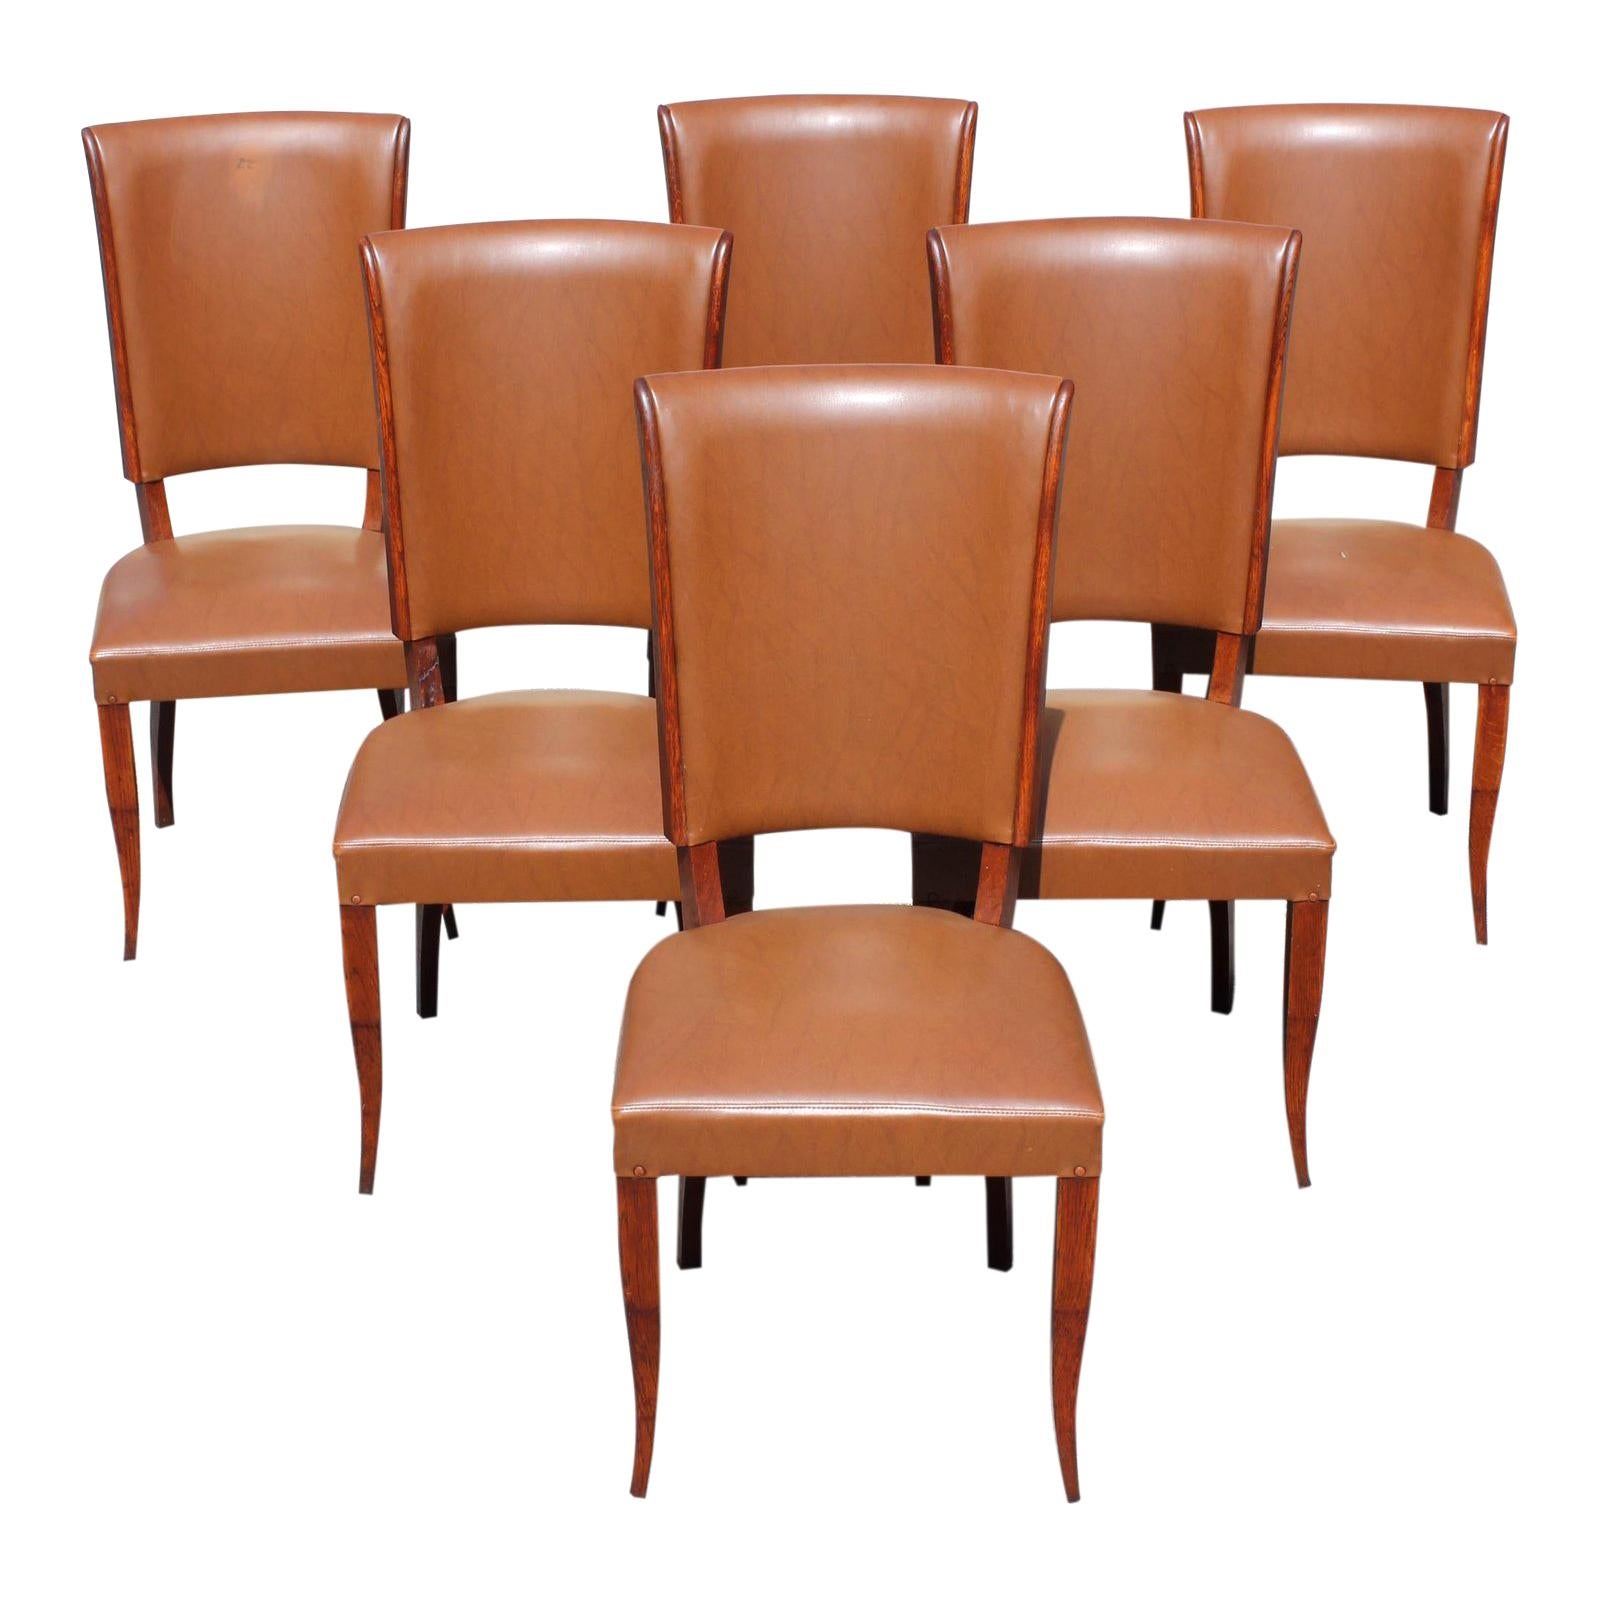 Set of 6 French Art Deco Mahogany Dining Chairs, 1940s